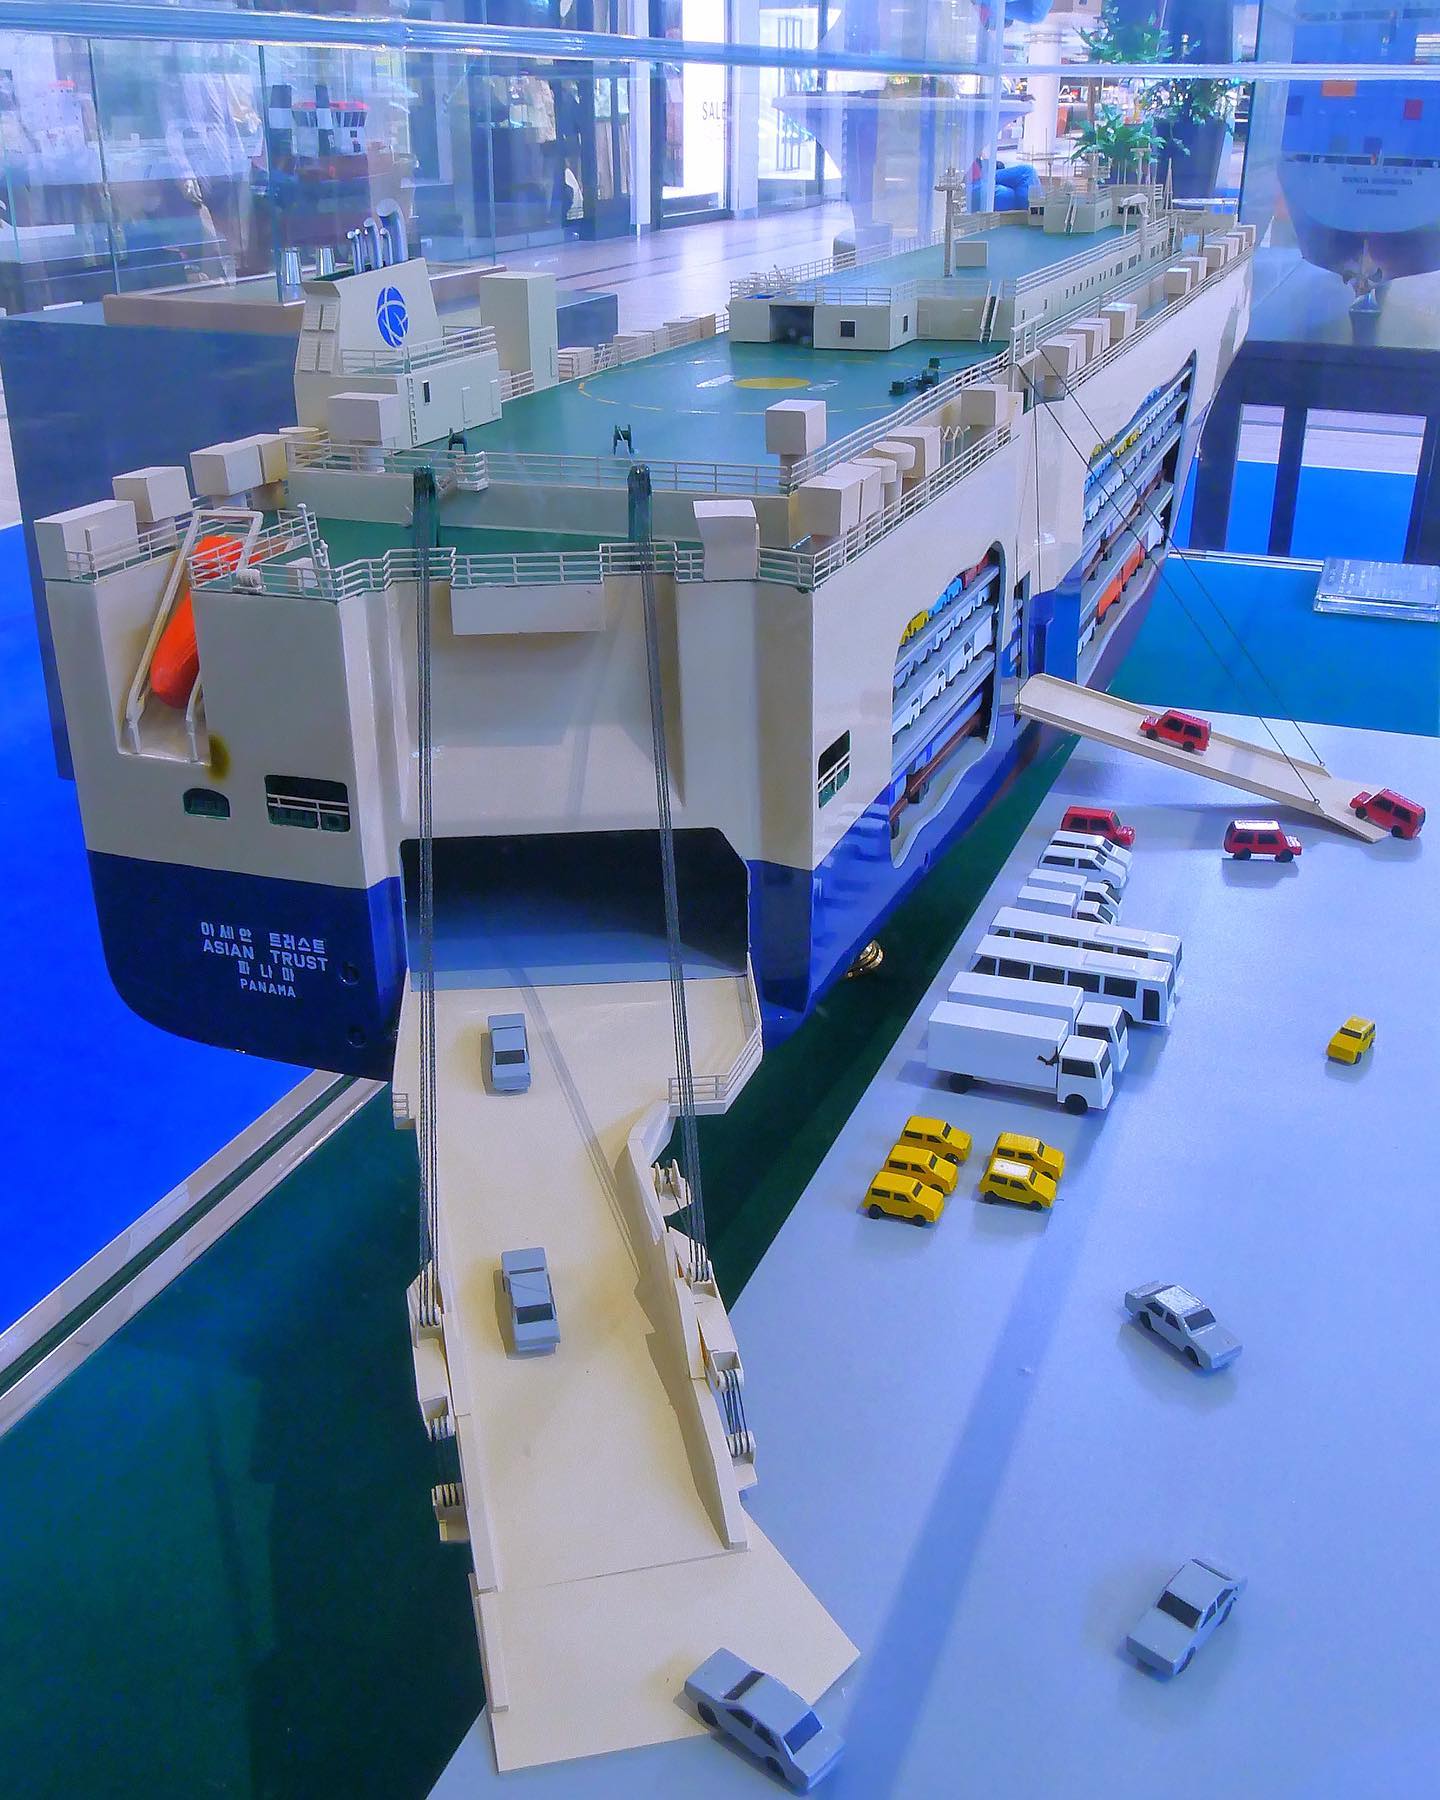 Car carrier Asian Trust. The yard model and diorama of the vehicle carrier “Asian Trust” was built in a scale of 1:200.